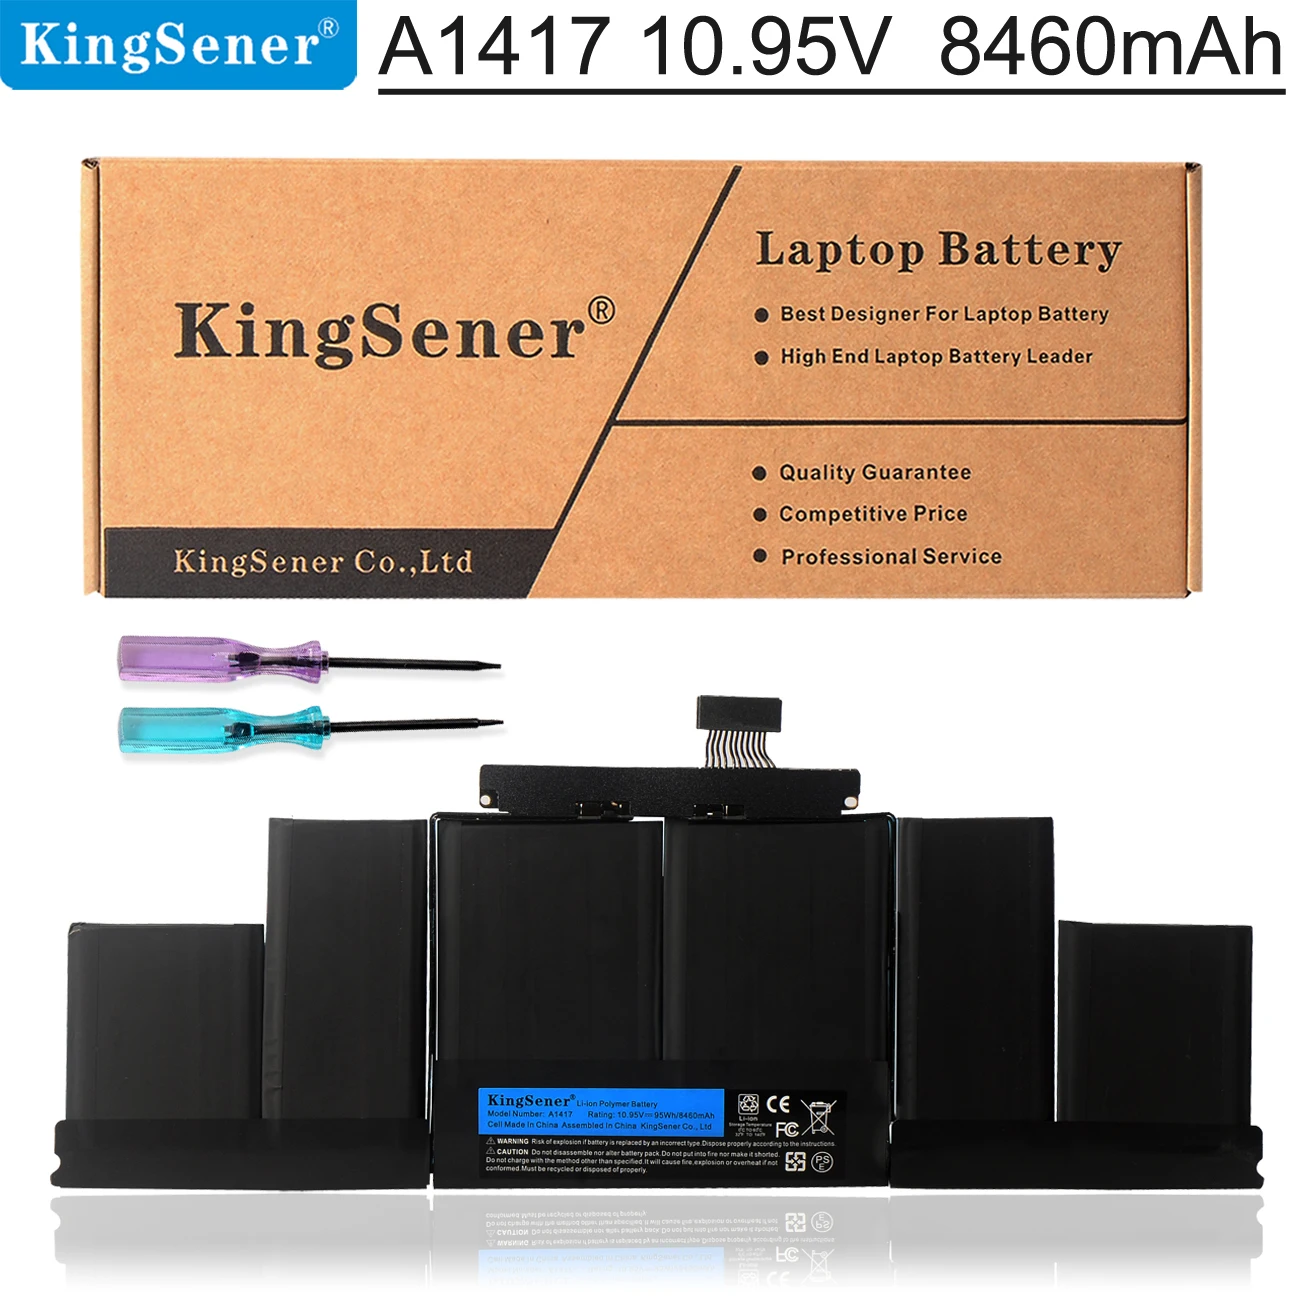 

KingSener Laptop Battery for Apple A1417 A1398 (2012 Early-2013 Version) for MacBook Retina Pro 15" fits ME665LL/A ME664LL/A